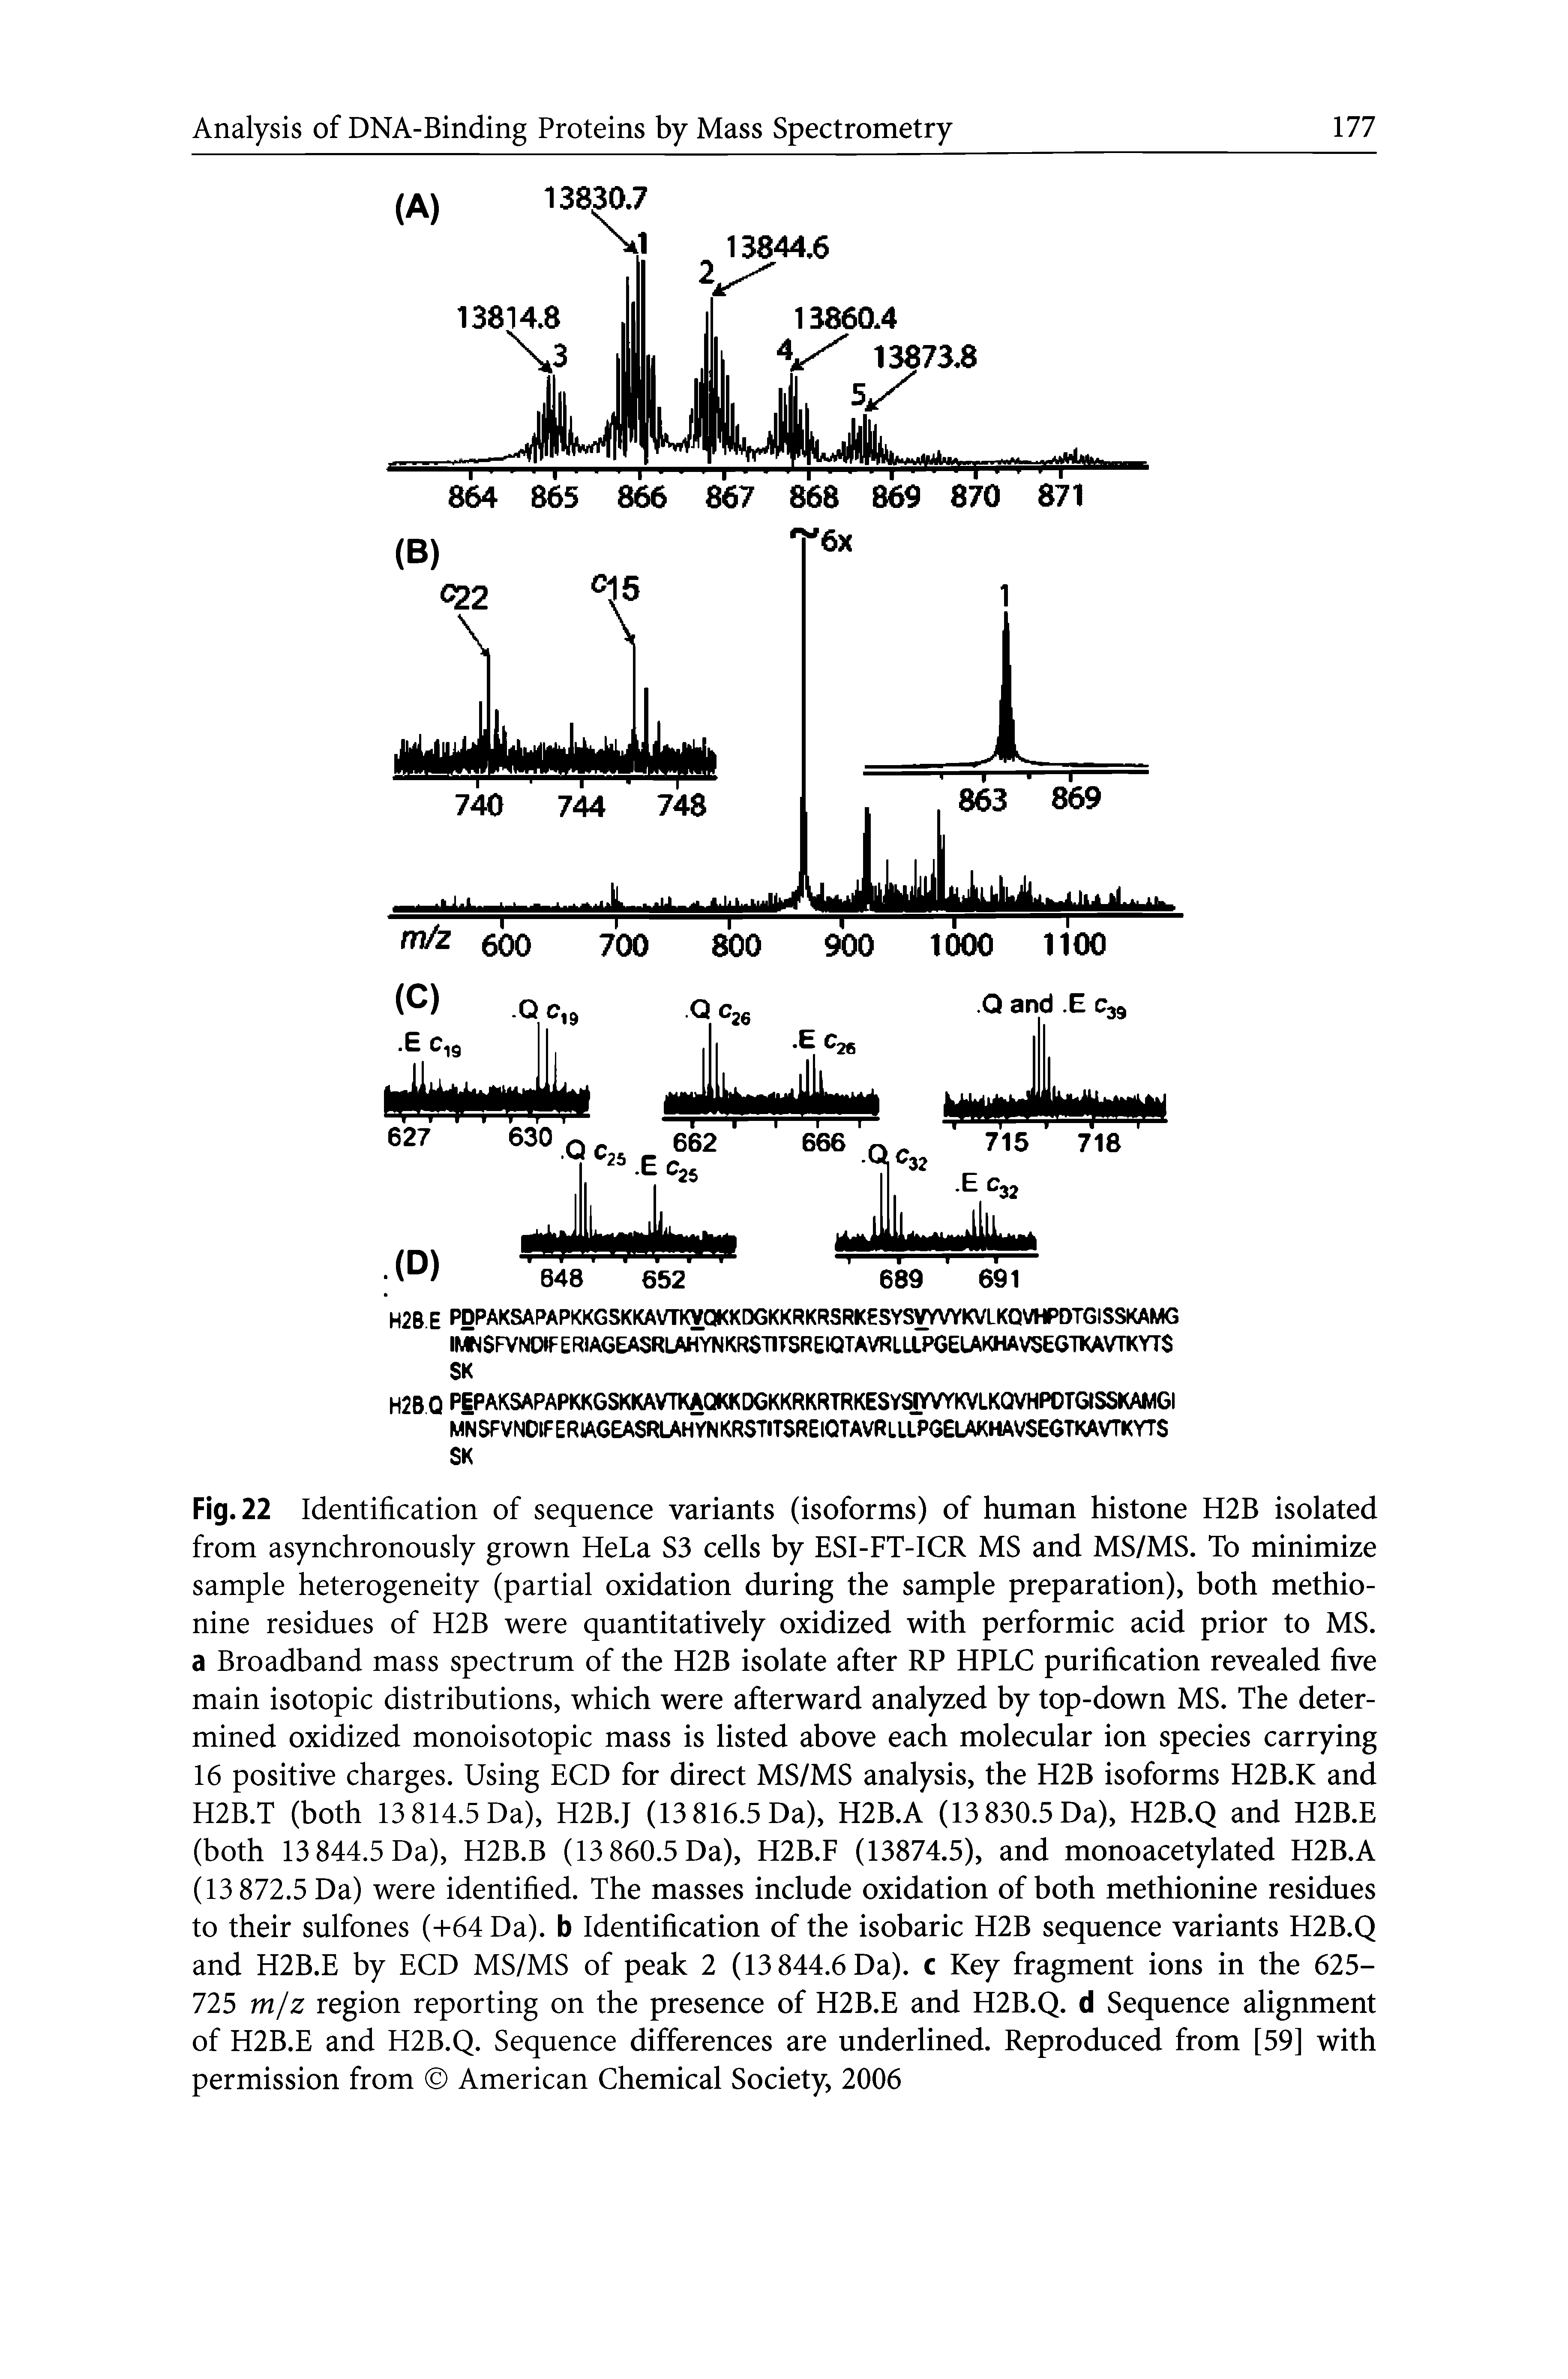 Fig. 22 Identification of sequence variants (isoforms) of human histone H2B isolated from asynchronously grown HeLa S3 cells by ESI-FT-ICR MS and MS/MS. To minimize sample heterogeneity (partial oxidation during the sample preparation), both methionine residues of H2B were quantitatively oxidized with performic acid prior to MS. a Broadband mass spectrum of the H2B isolate after RP HPLC purification revealed five main isotopic distributions, which were afterward analyzed by top-down MS. The determined oxidized monoisotopic mass is listed above each molecular ion species carrying 16 positive charges. Using BCD for direct MS/MS analysis, the H2B isoforms H2B.K and H2B.T (both 13 814.5 Da), H2B.J (13 816.5 Da), H2B.A (13 830.5 Da), H2B.Q and H2B.E (both 13 844.5 Da), H2B.B (13 860.5 Da), H2B.F (13874.5), and monoacetylated H2B.A (13 872.5 Da) were identified. The masses include oxidation of both methionine residues to their sulfones (-1-64 Da), b Identification of the isobaric H2B sequence variants H2B.Q and H2B.E by ECD MS/MS of peak 2 (13 844.6 Da), c Key fragment ions in the 625-725 m/z region reporting on the presence of H2B.E and H2B.Q. d Sequence alignment of H2B.E and H2B.Q. Sequence differences are underlined. Reproduced from [59] with permission from American Chemical Society, 2006...